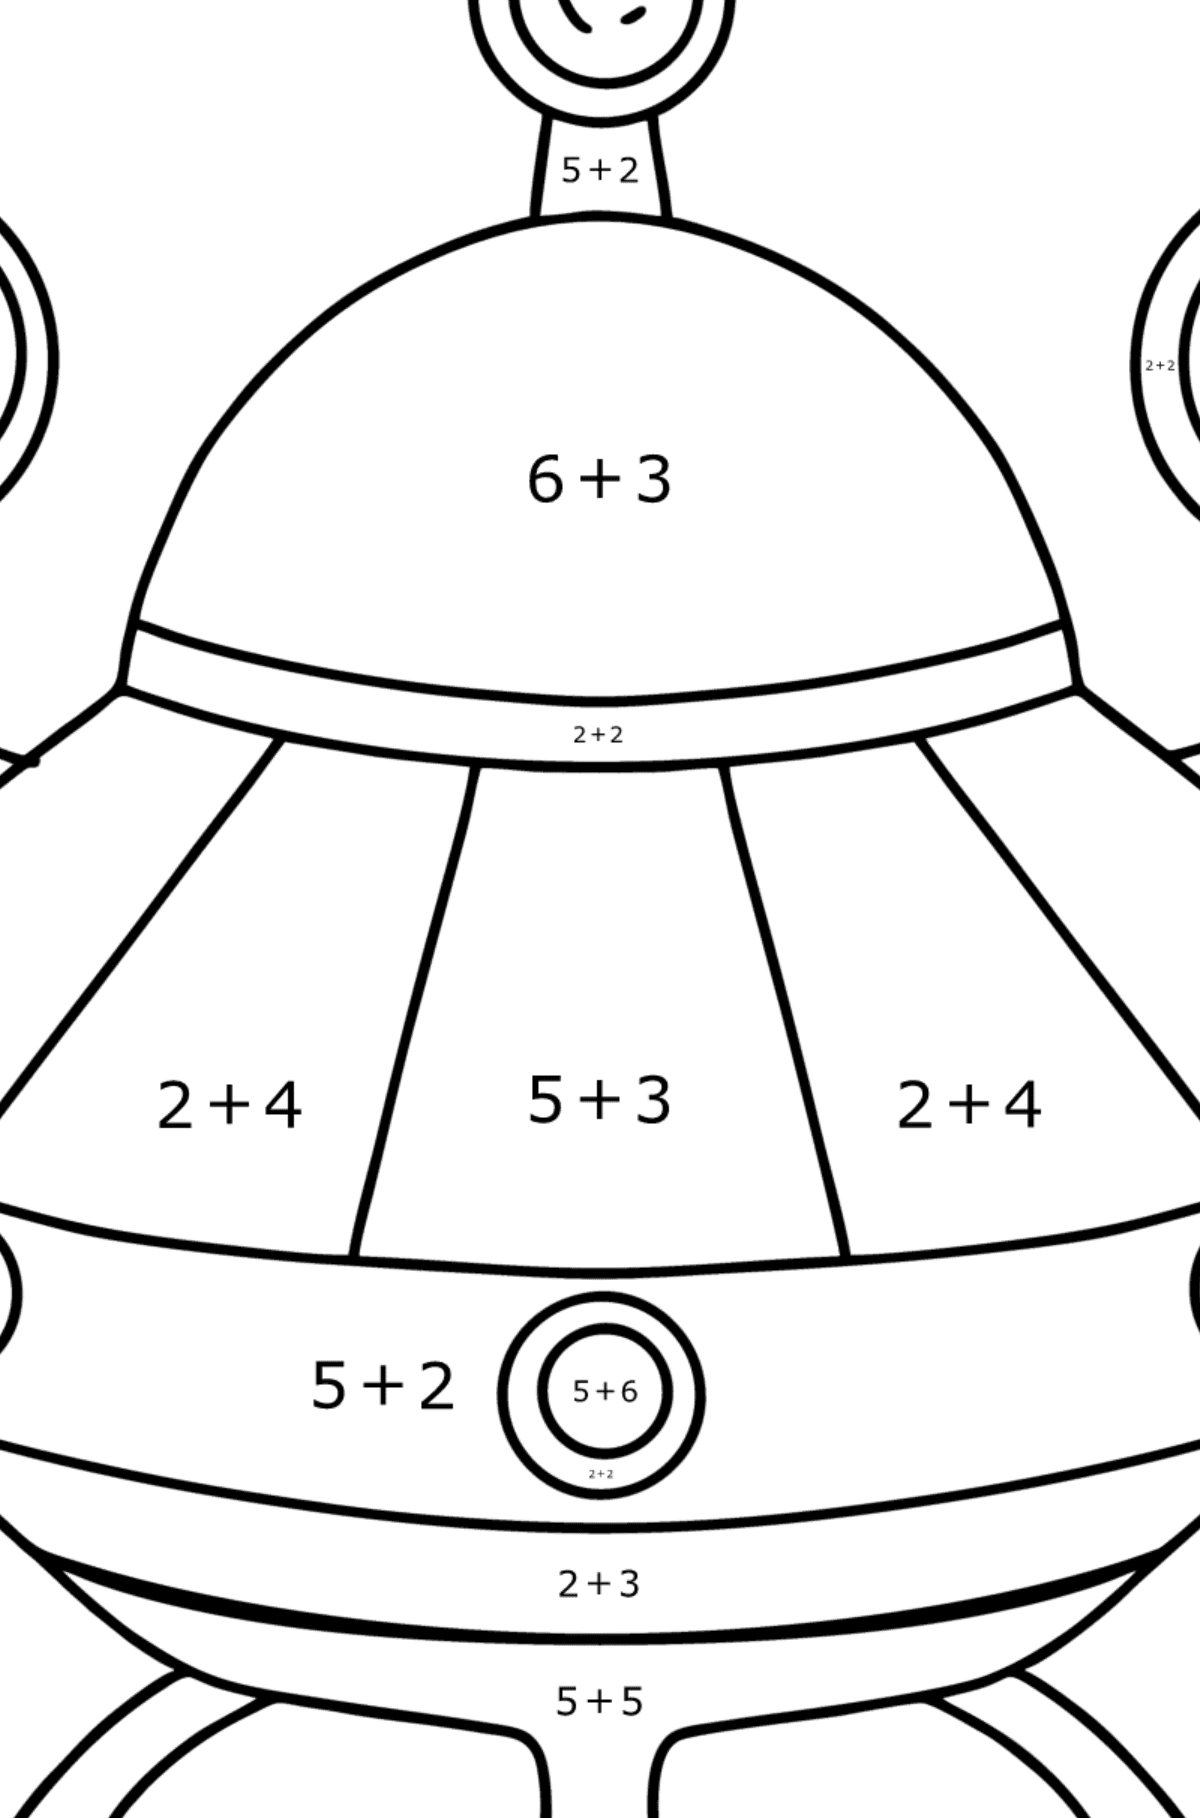 Alien spaceship coloring pages - Math Coloring - Addition for Kids